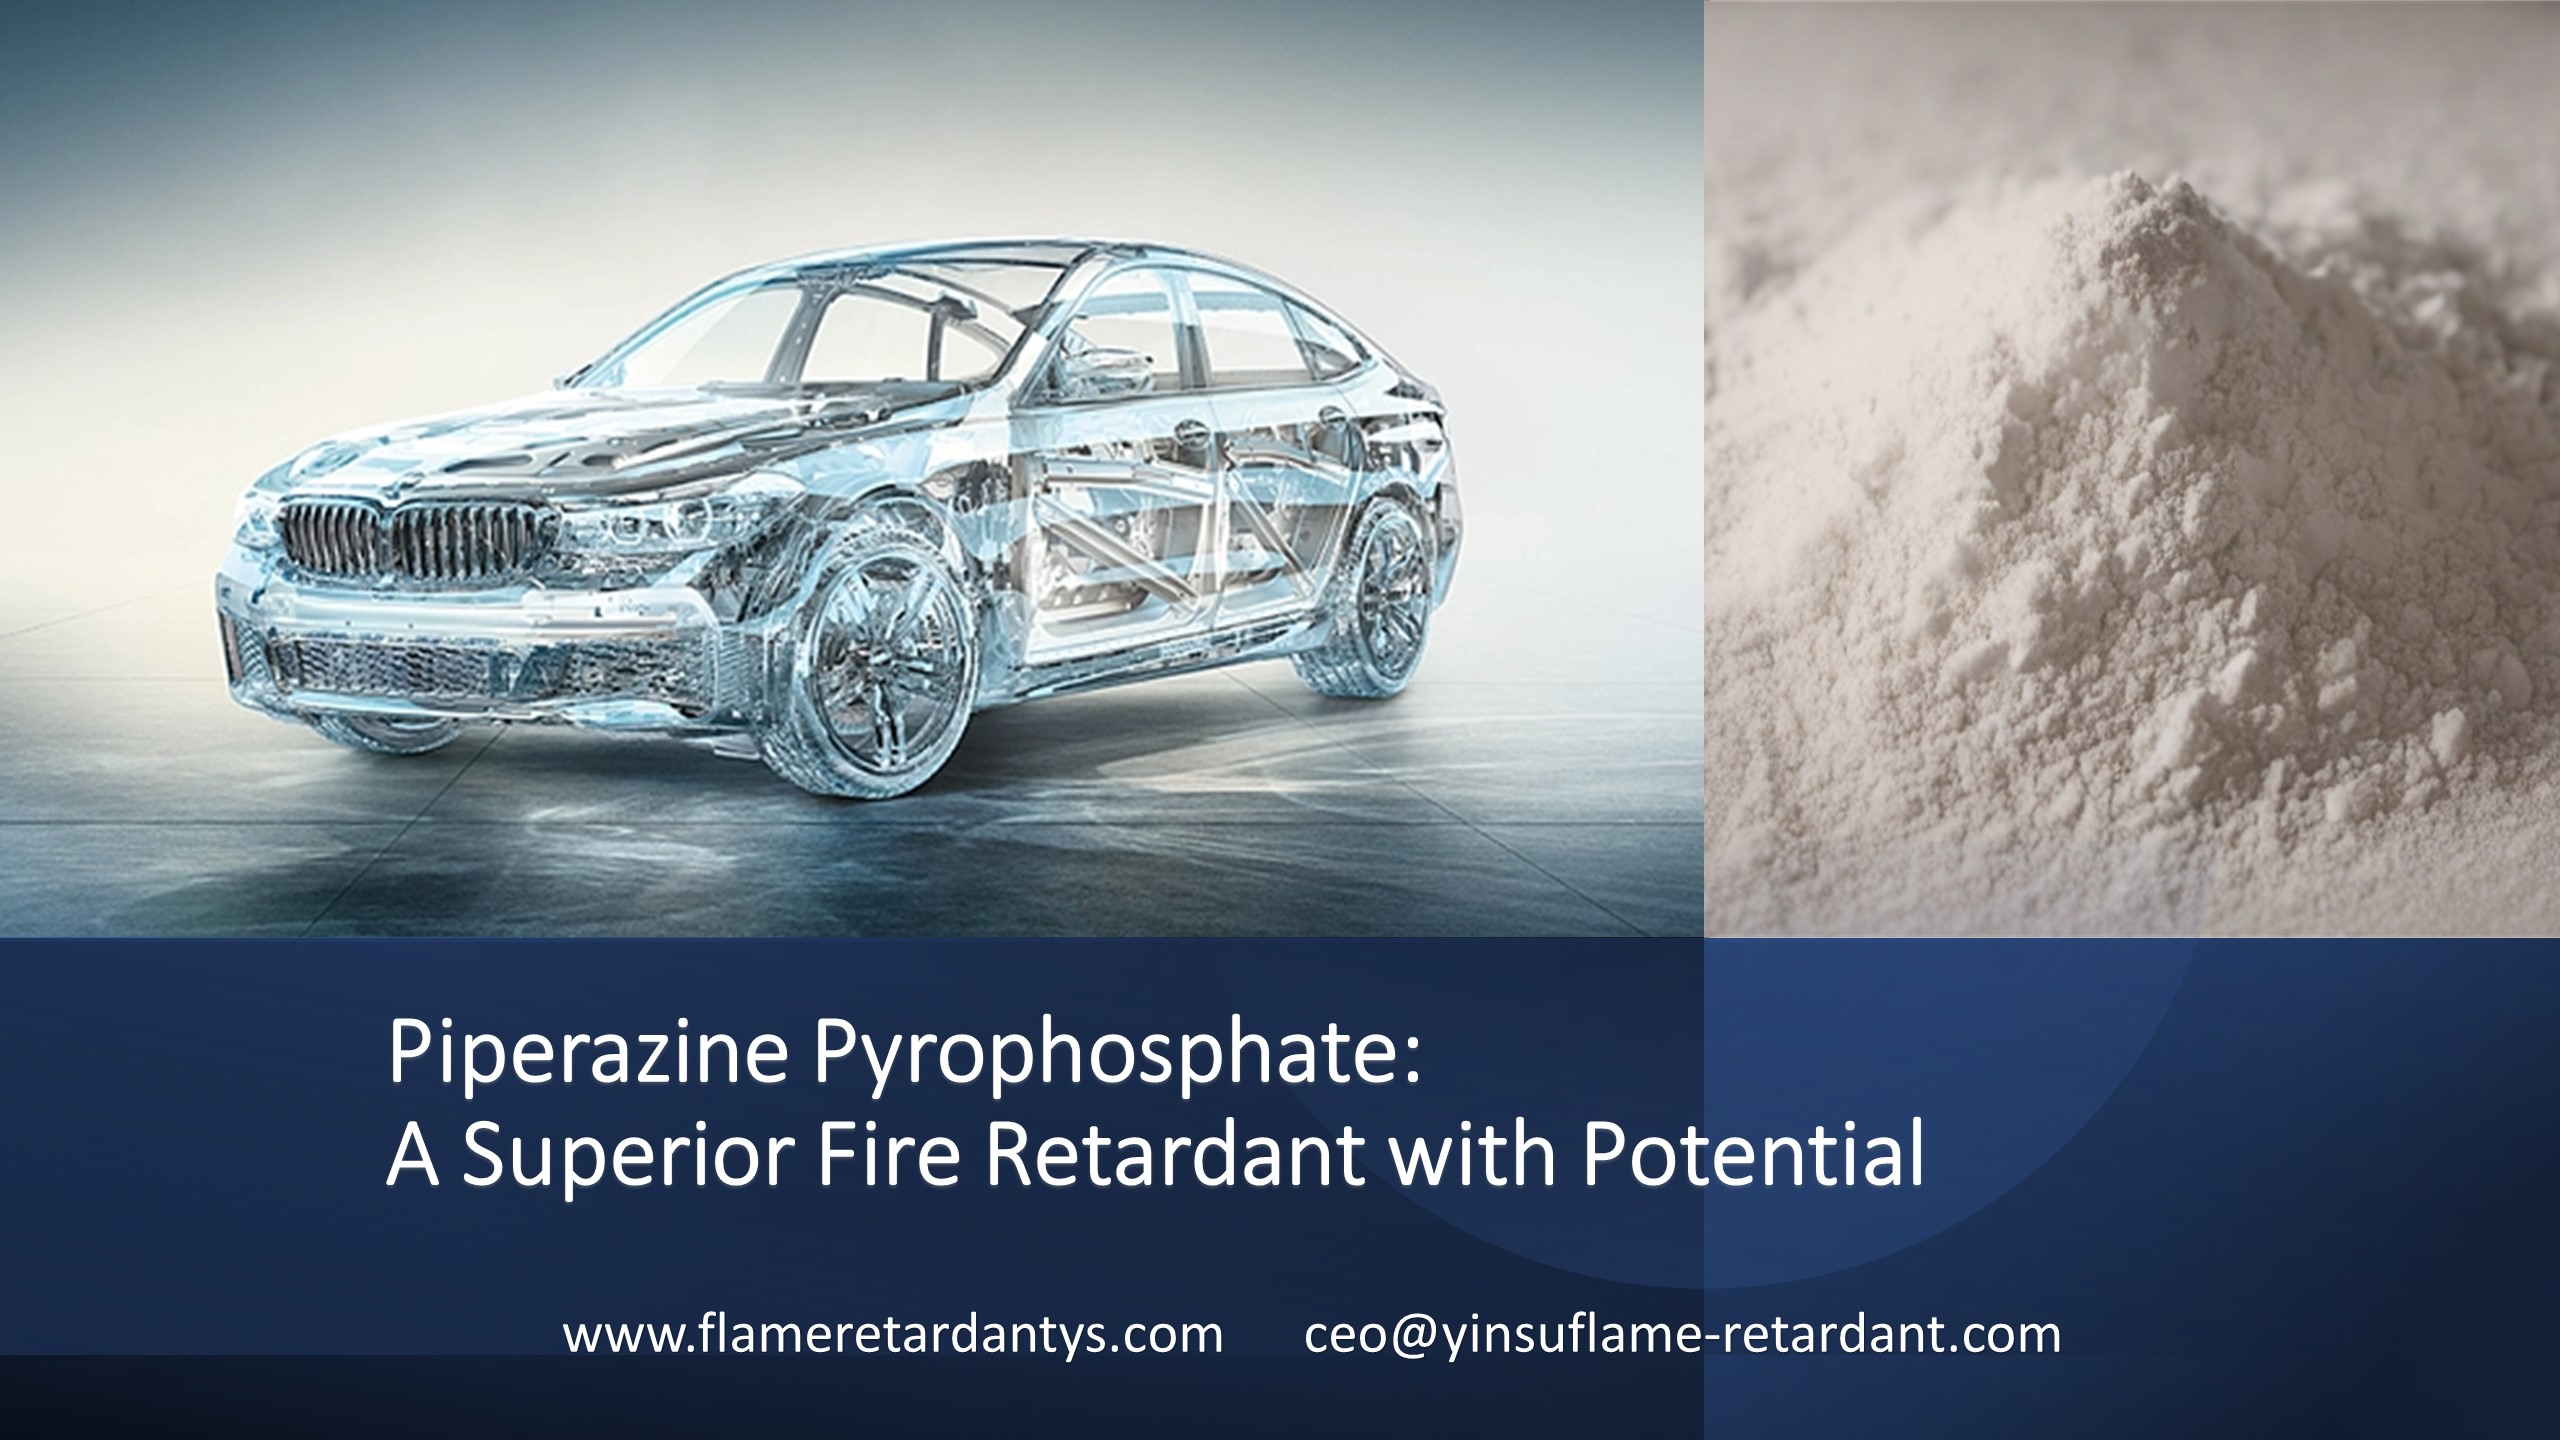 Piperazine Pyrophosphate: A Superior Fire Retardant with Potential